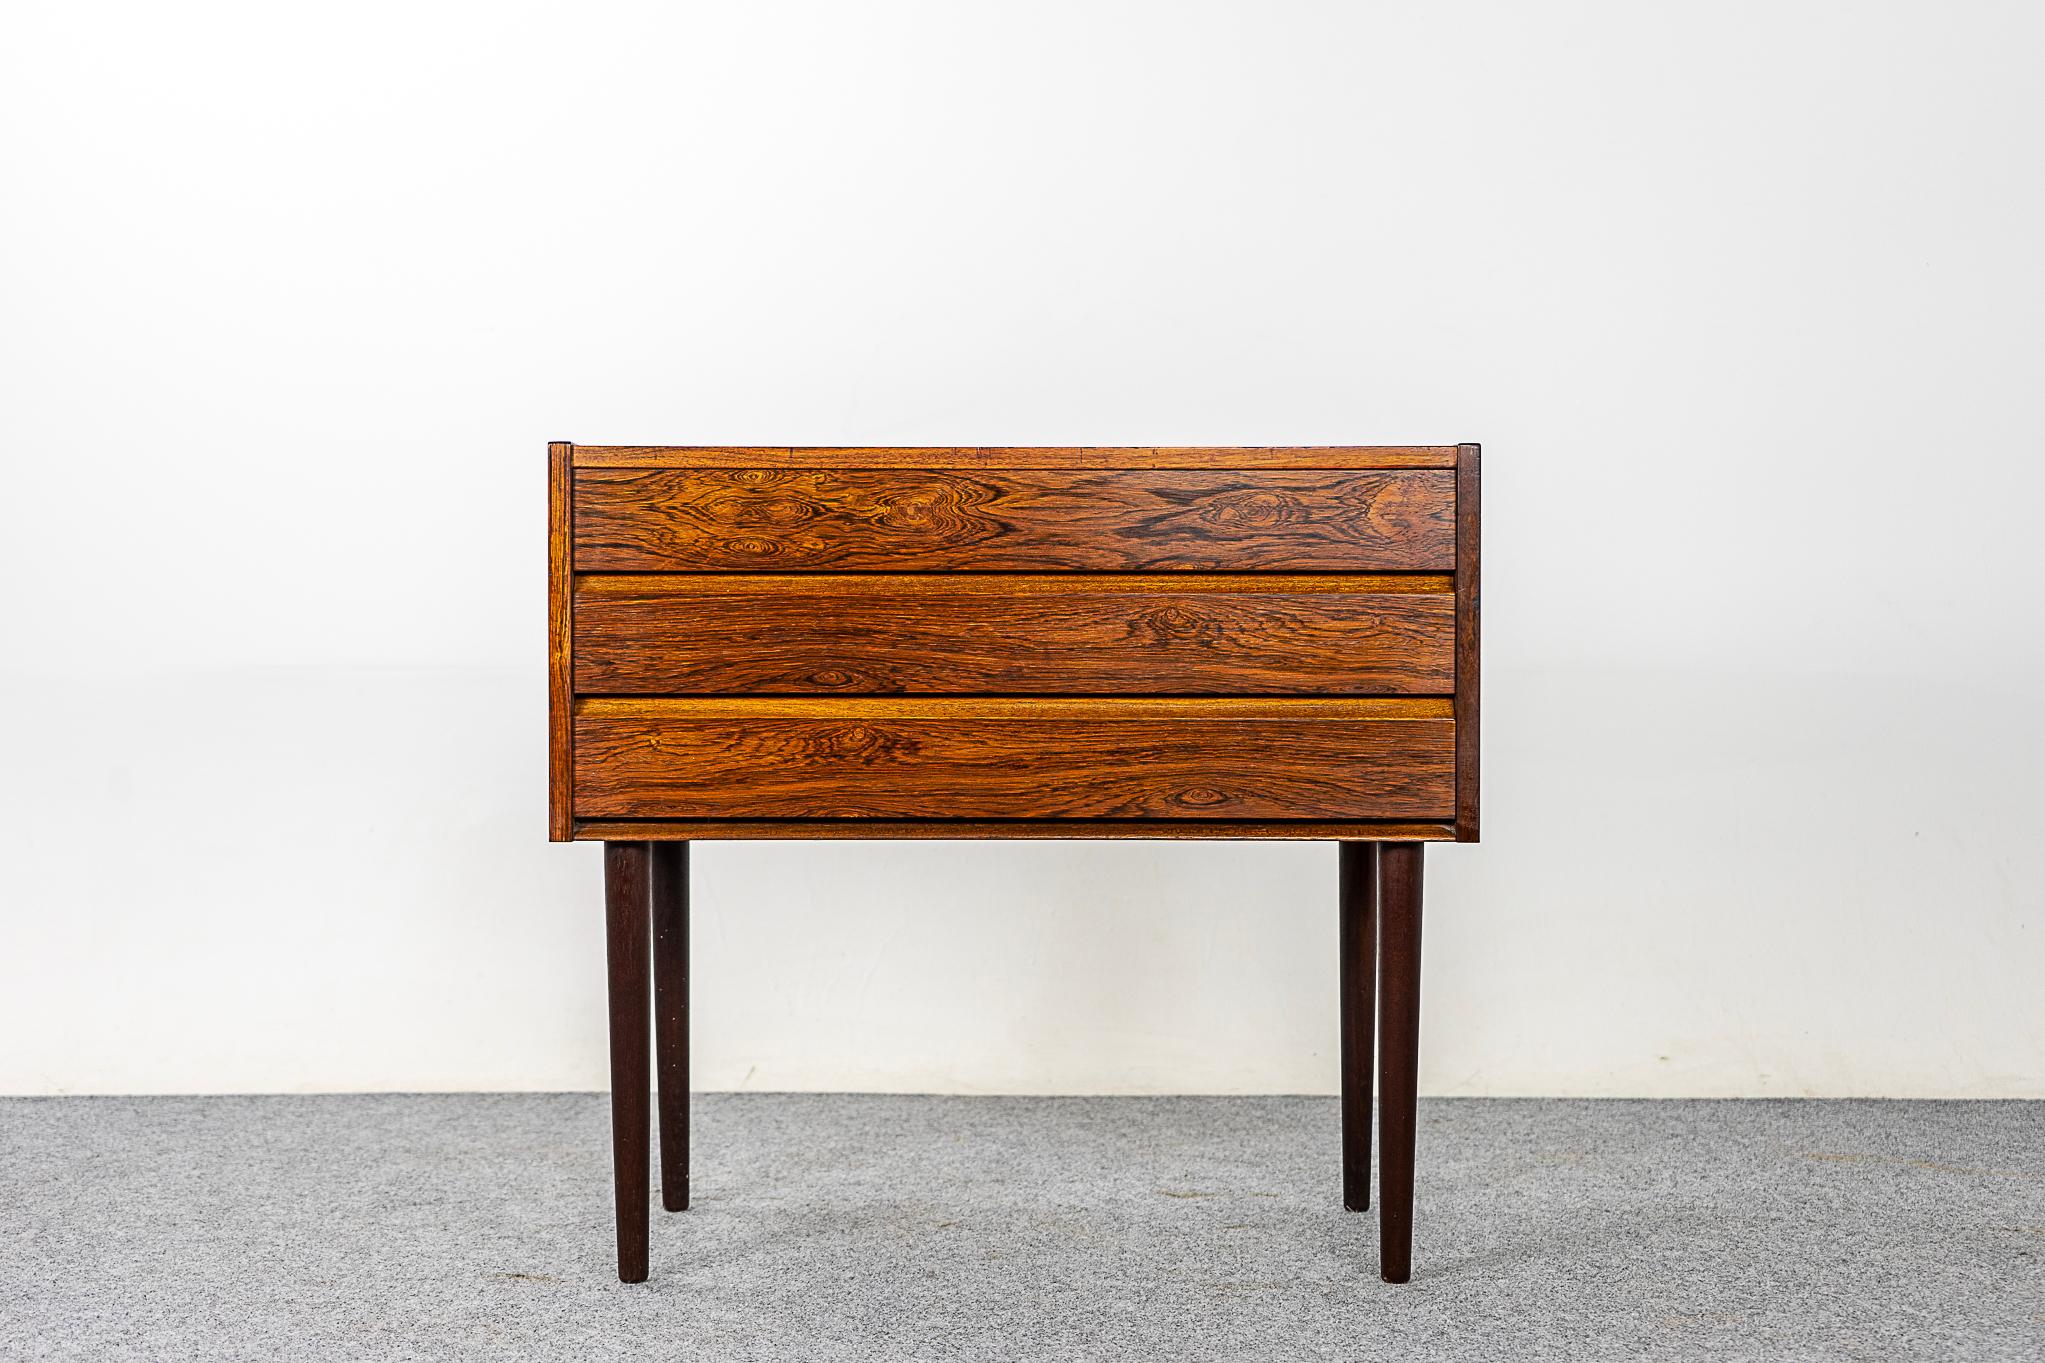 Rosewood Danish bedside/entryway dresser, circa 1960's. Beautifully veneered case with integrated sleek handles. Three dovetailed drawers, storage for small items. Slender, tapered, solid wood removable legs.